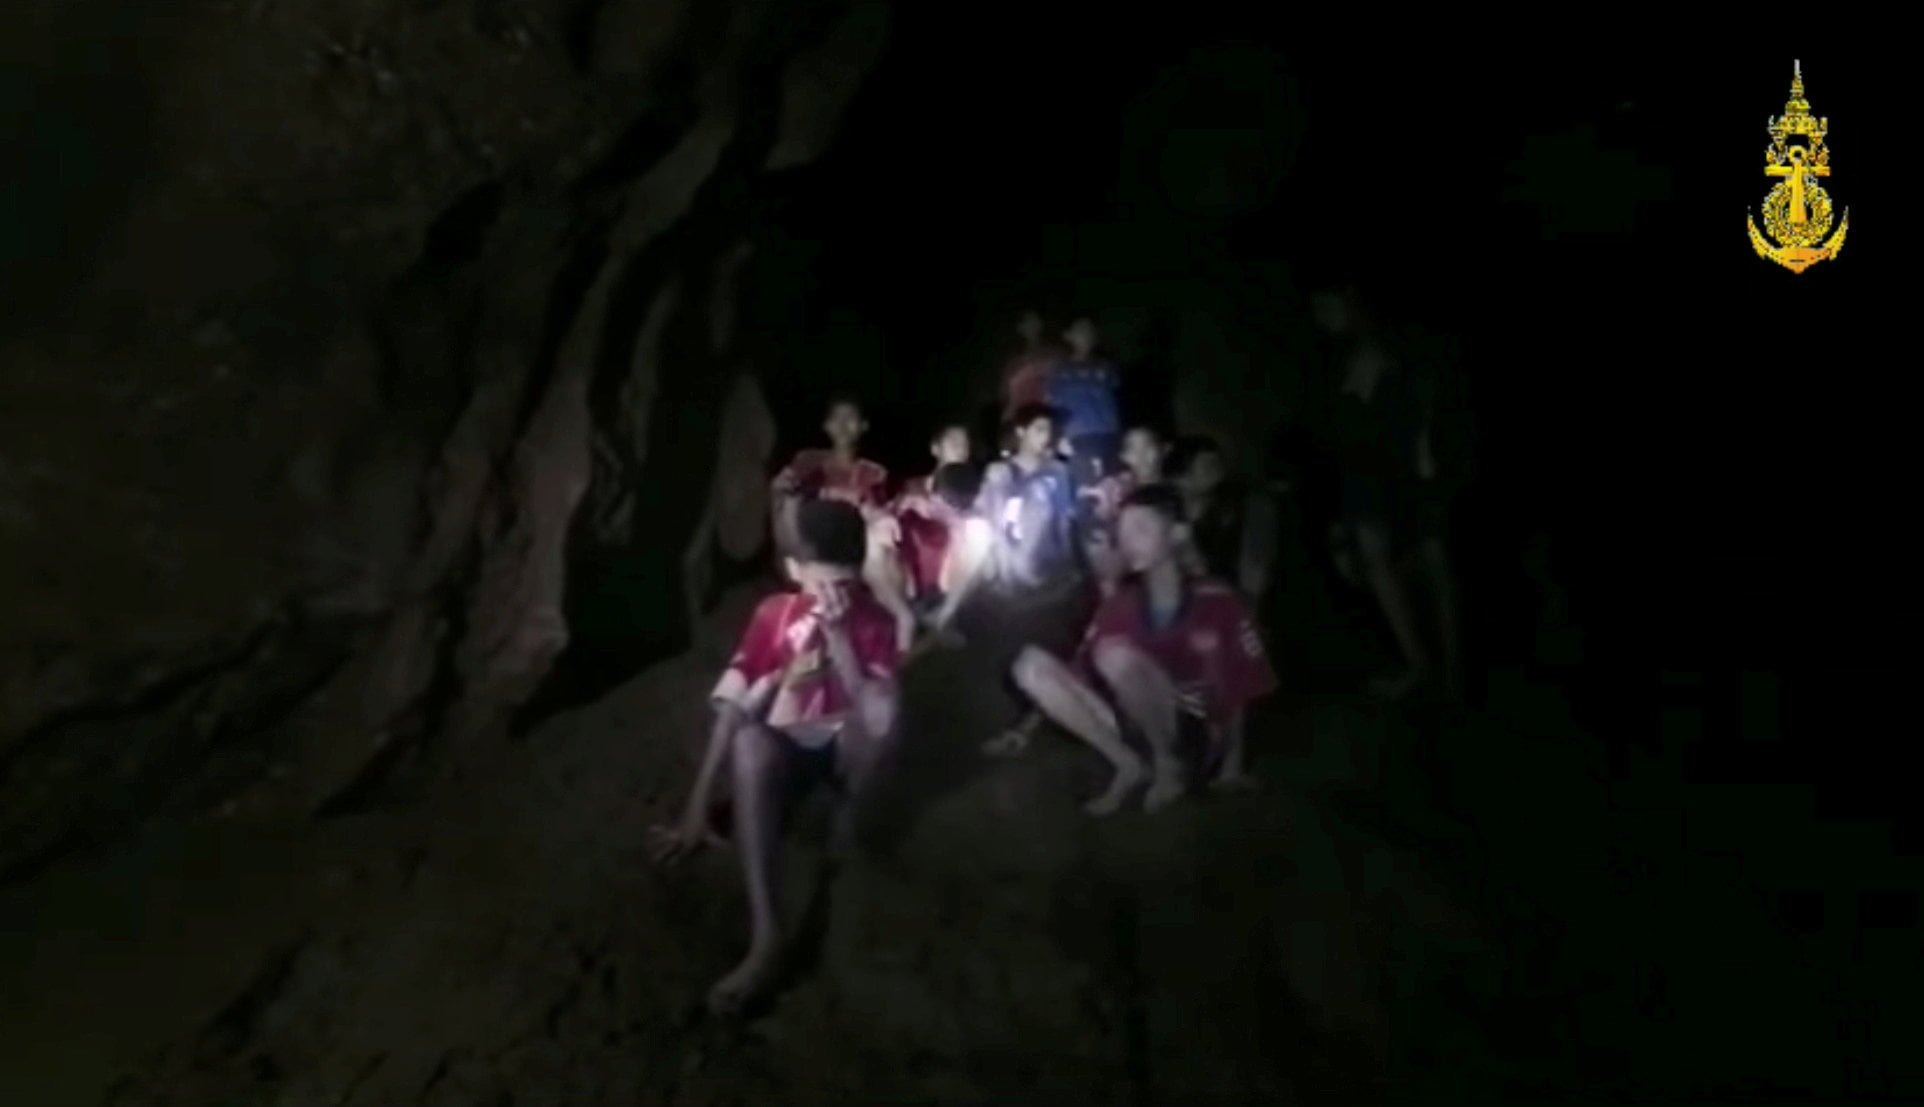 Boys from an under-16 soccer team and their coach wait to be rescued after they were trapped inside a flooded cave in Chiang Rai